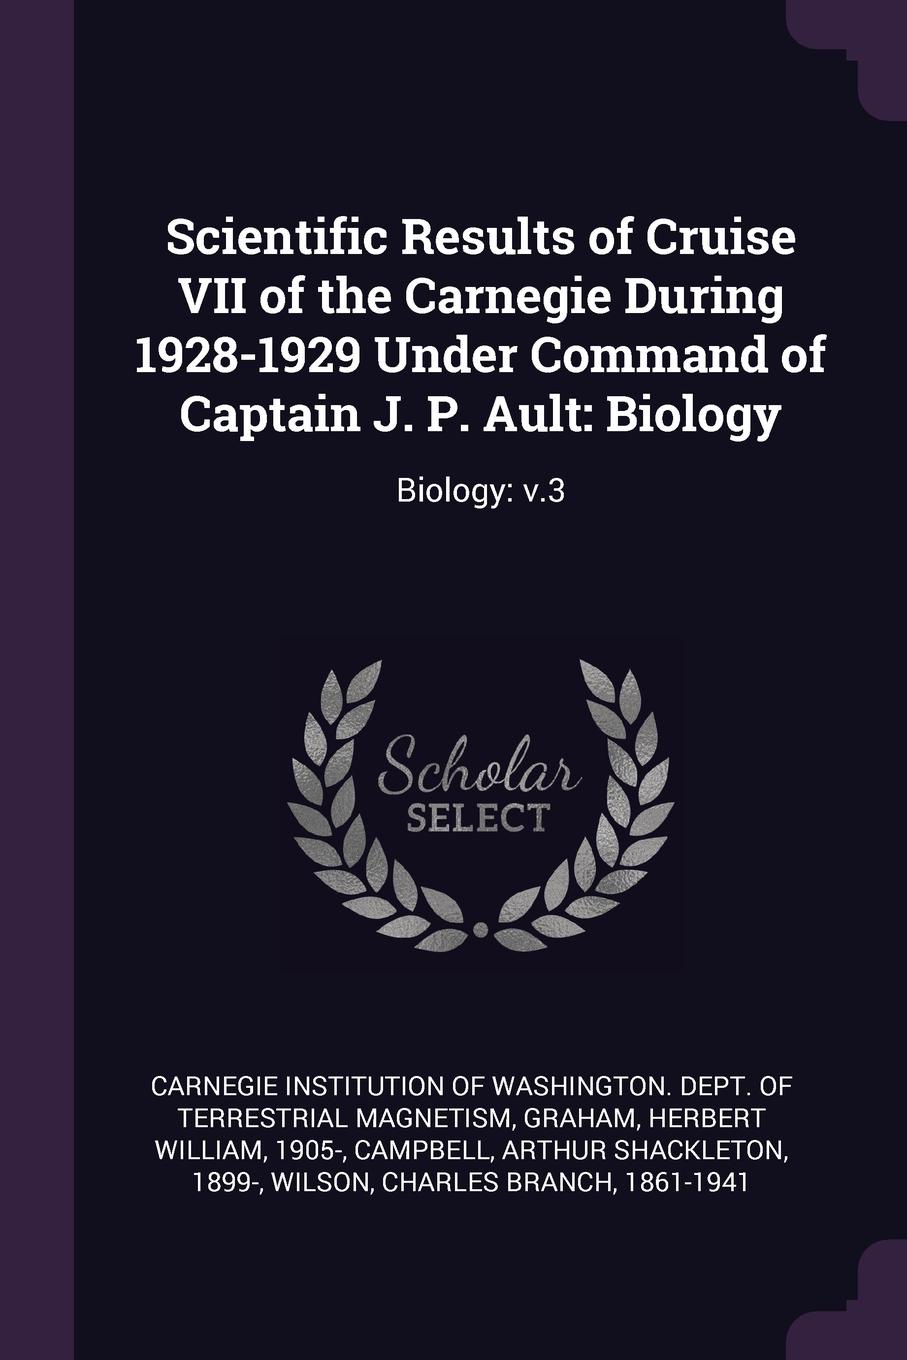 Scientific Results of Cruise VII of the Carnegie During 1928-1929 Under Command of Captain J. P. Ault. Biology: Biology: v.3